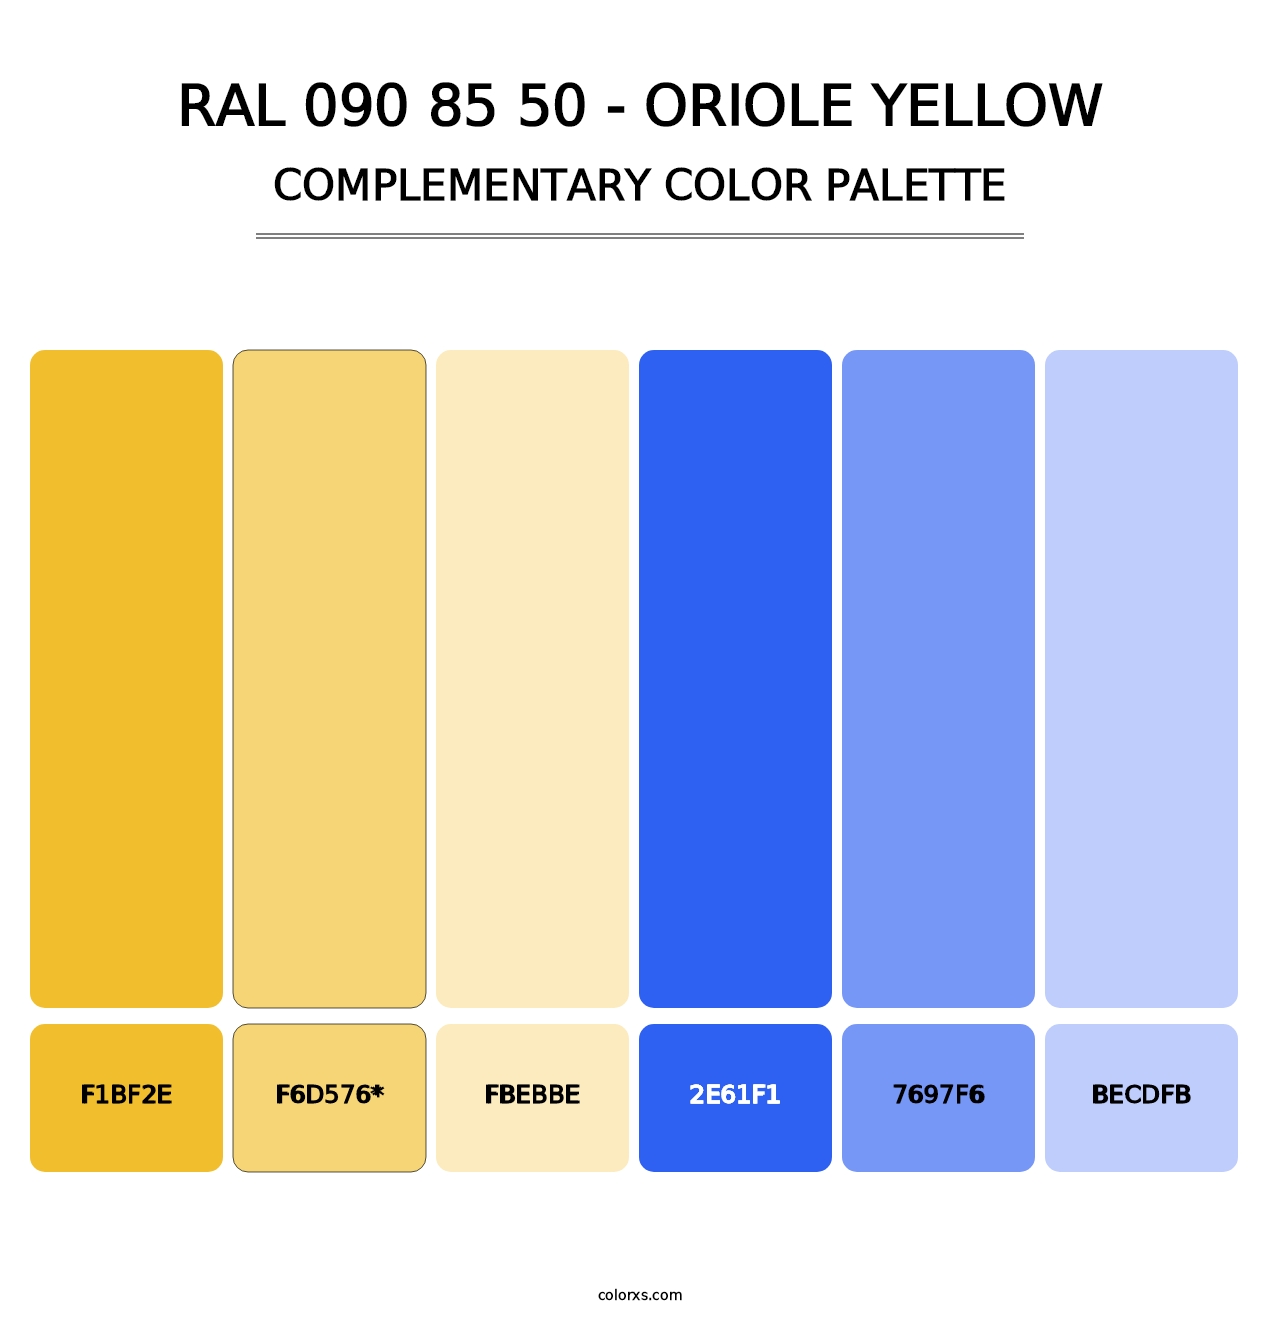 RAL 090 85 50 - Oriole Yellow - Complementary Color Palette